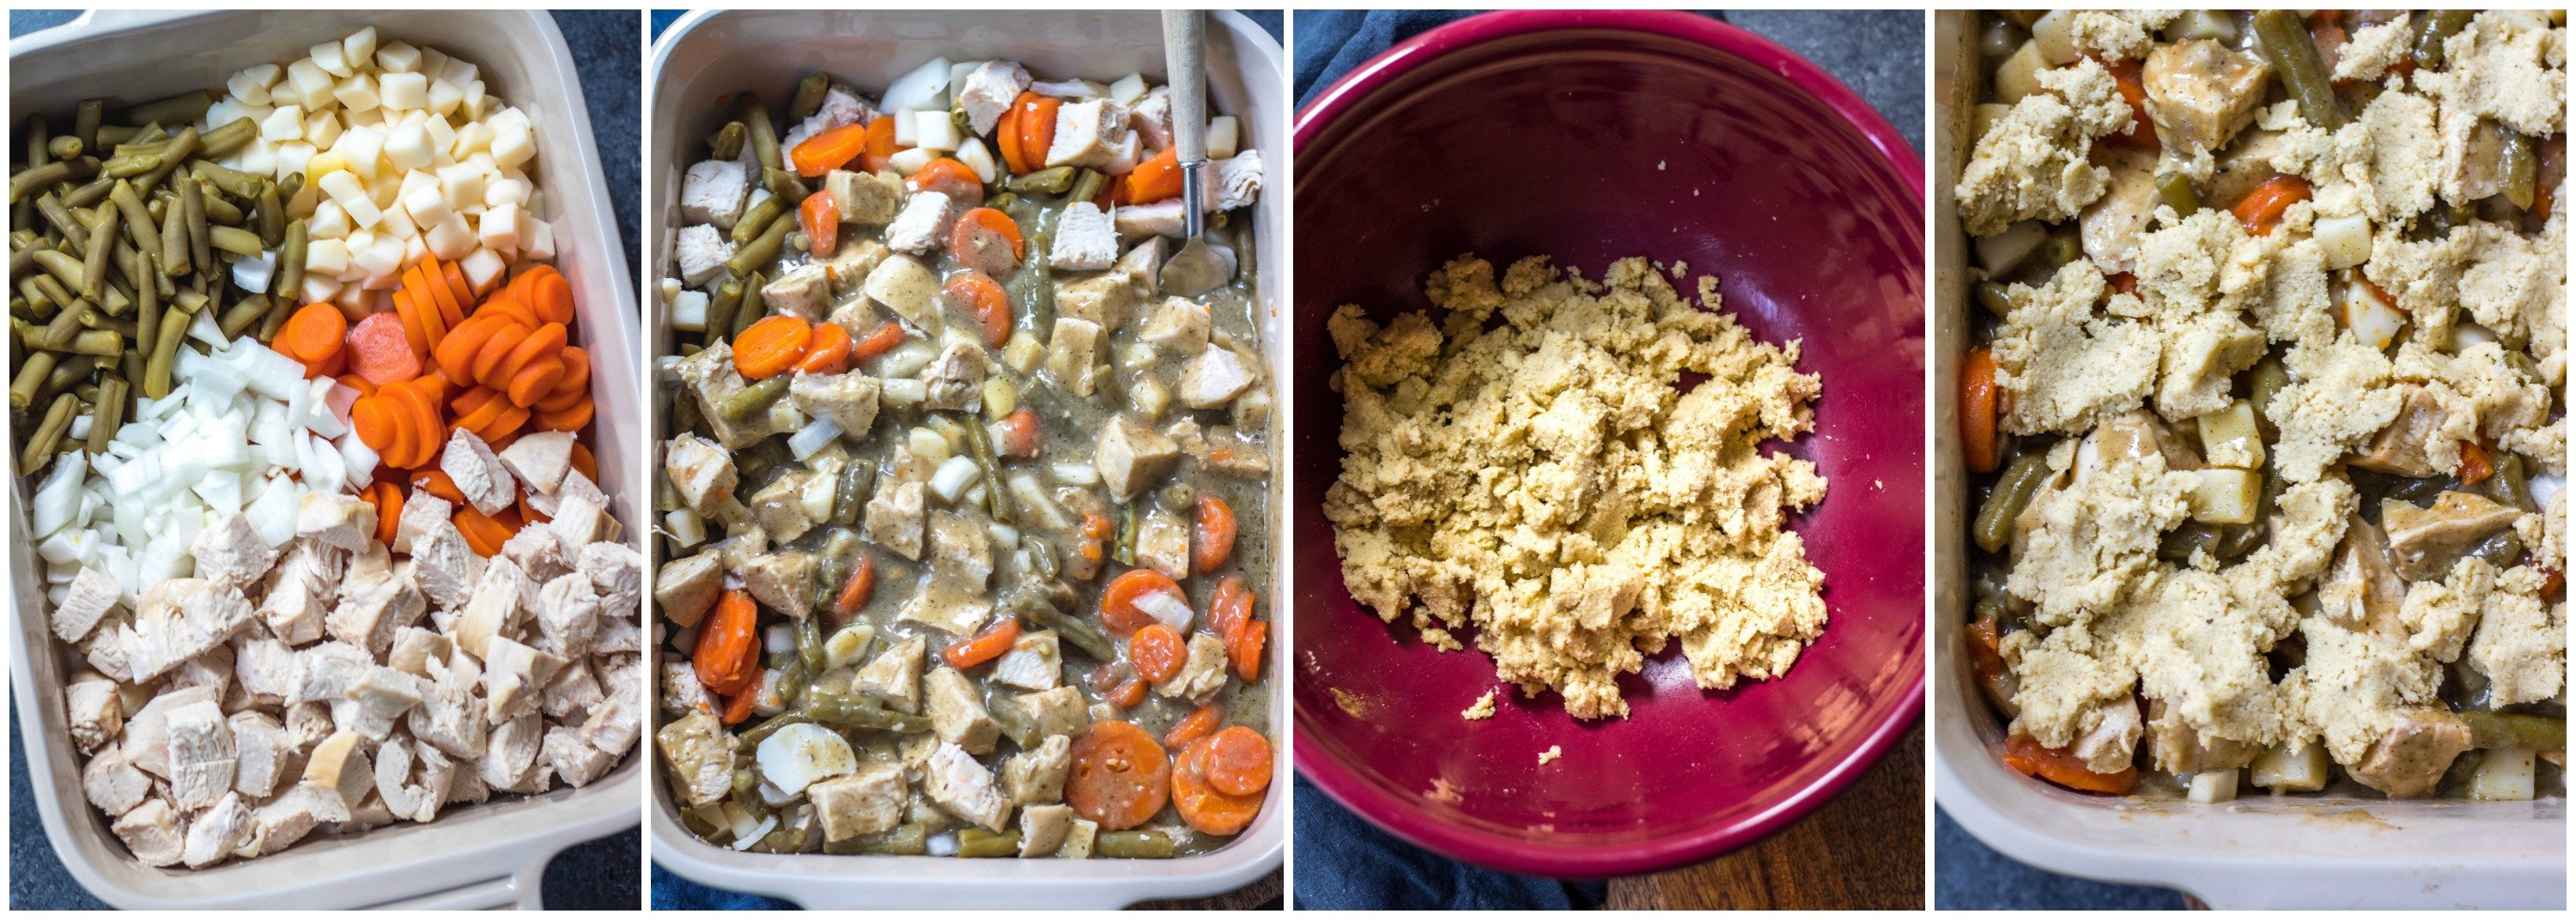 cooking process photographs that show how to make Whole30 chicken pot pie casserole step by step